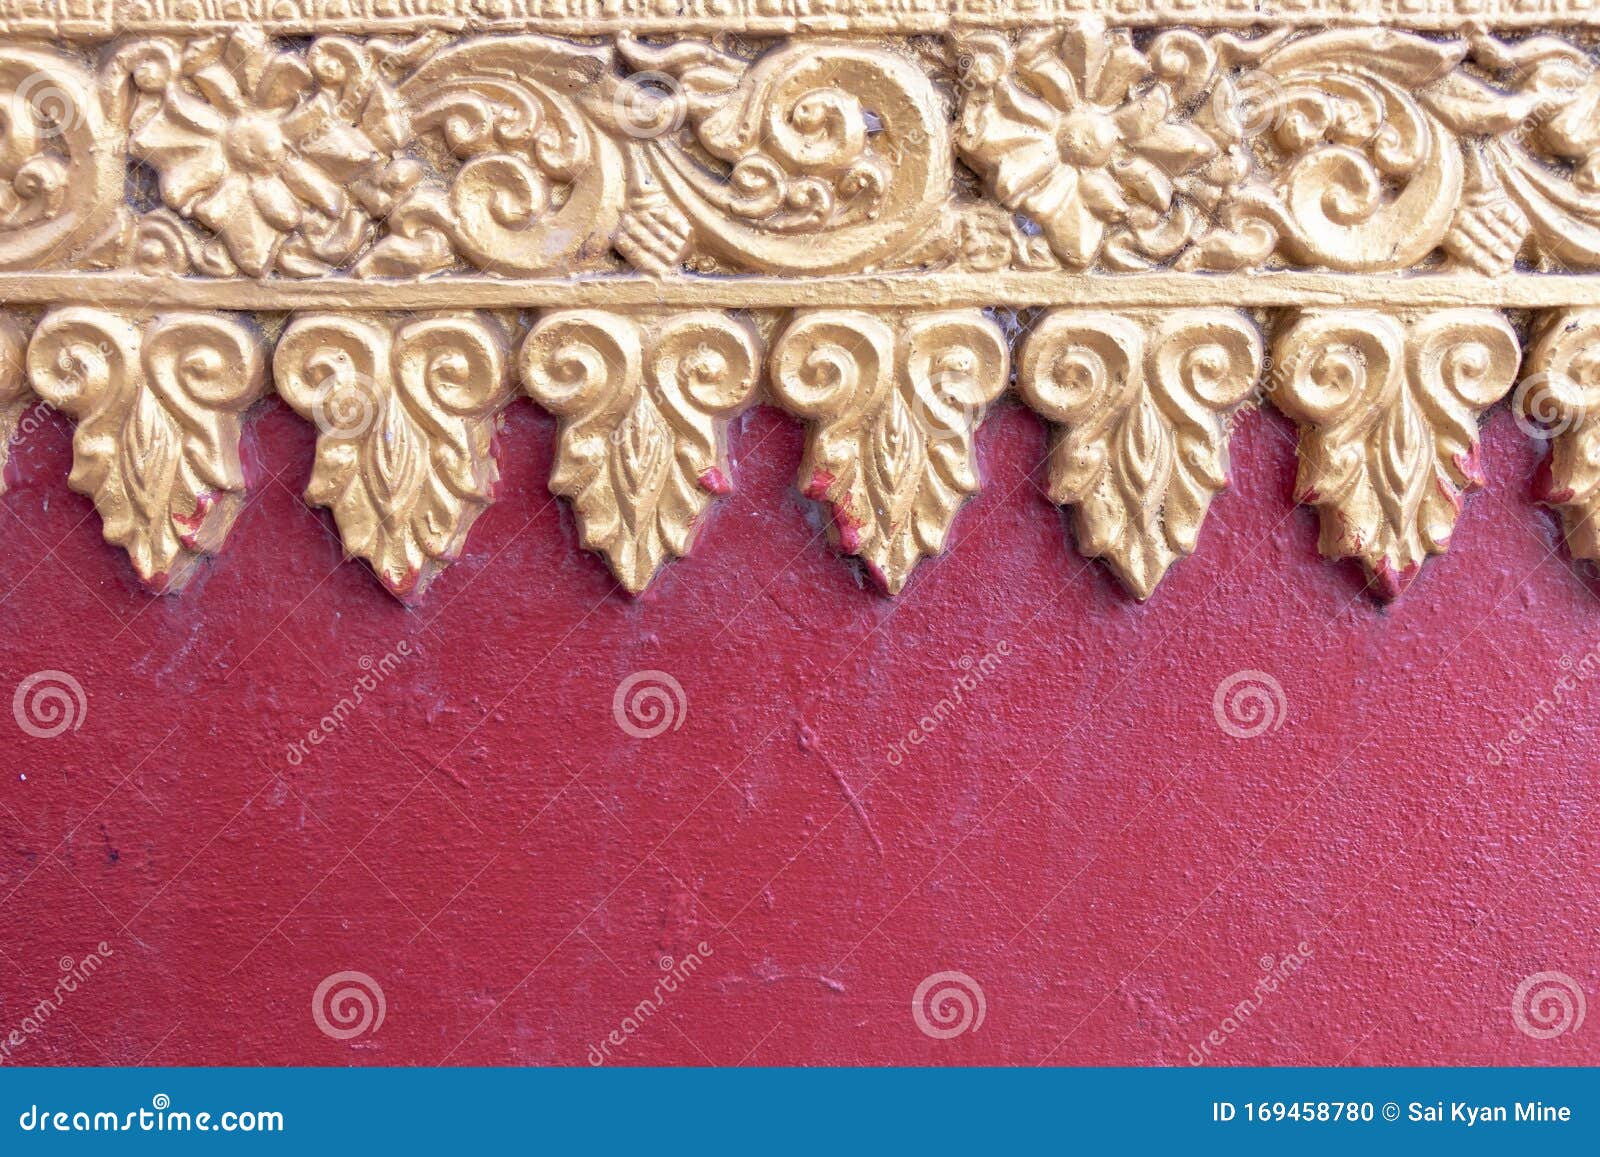 Myanmar Style Ornament Pattern Background. Stock Photo - Image of tung,  buddhist: 169458780